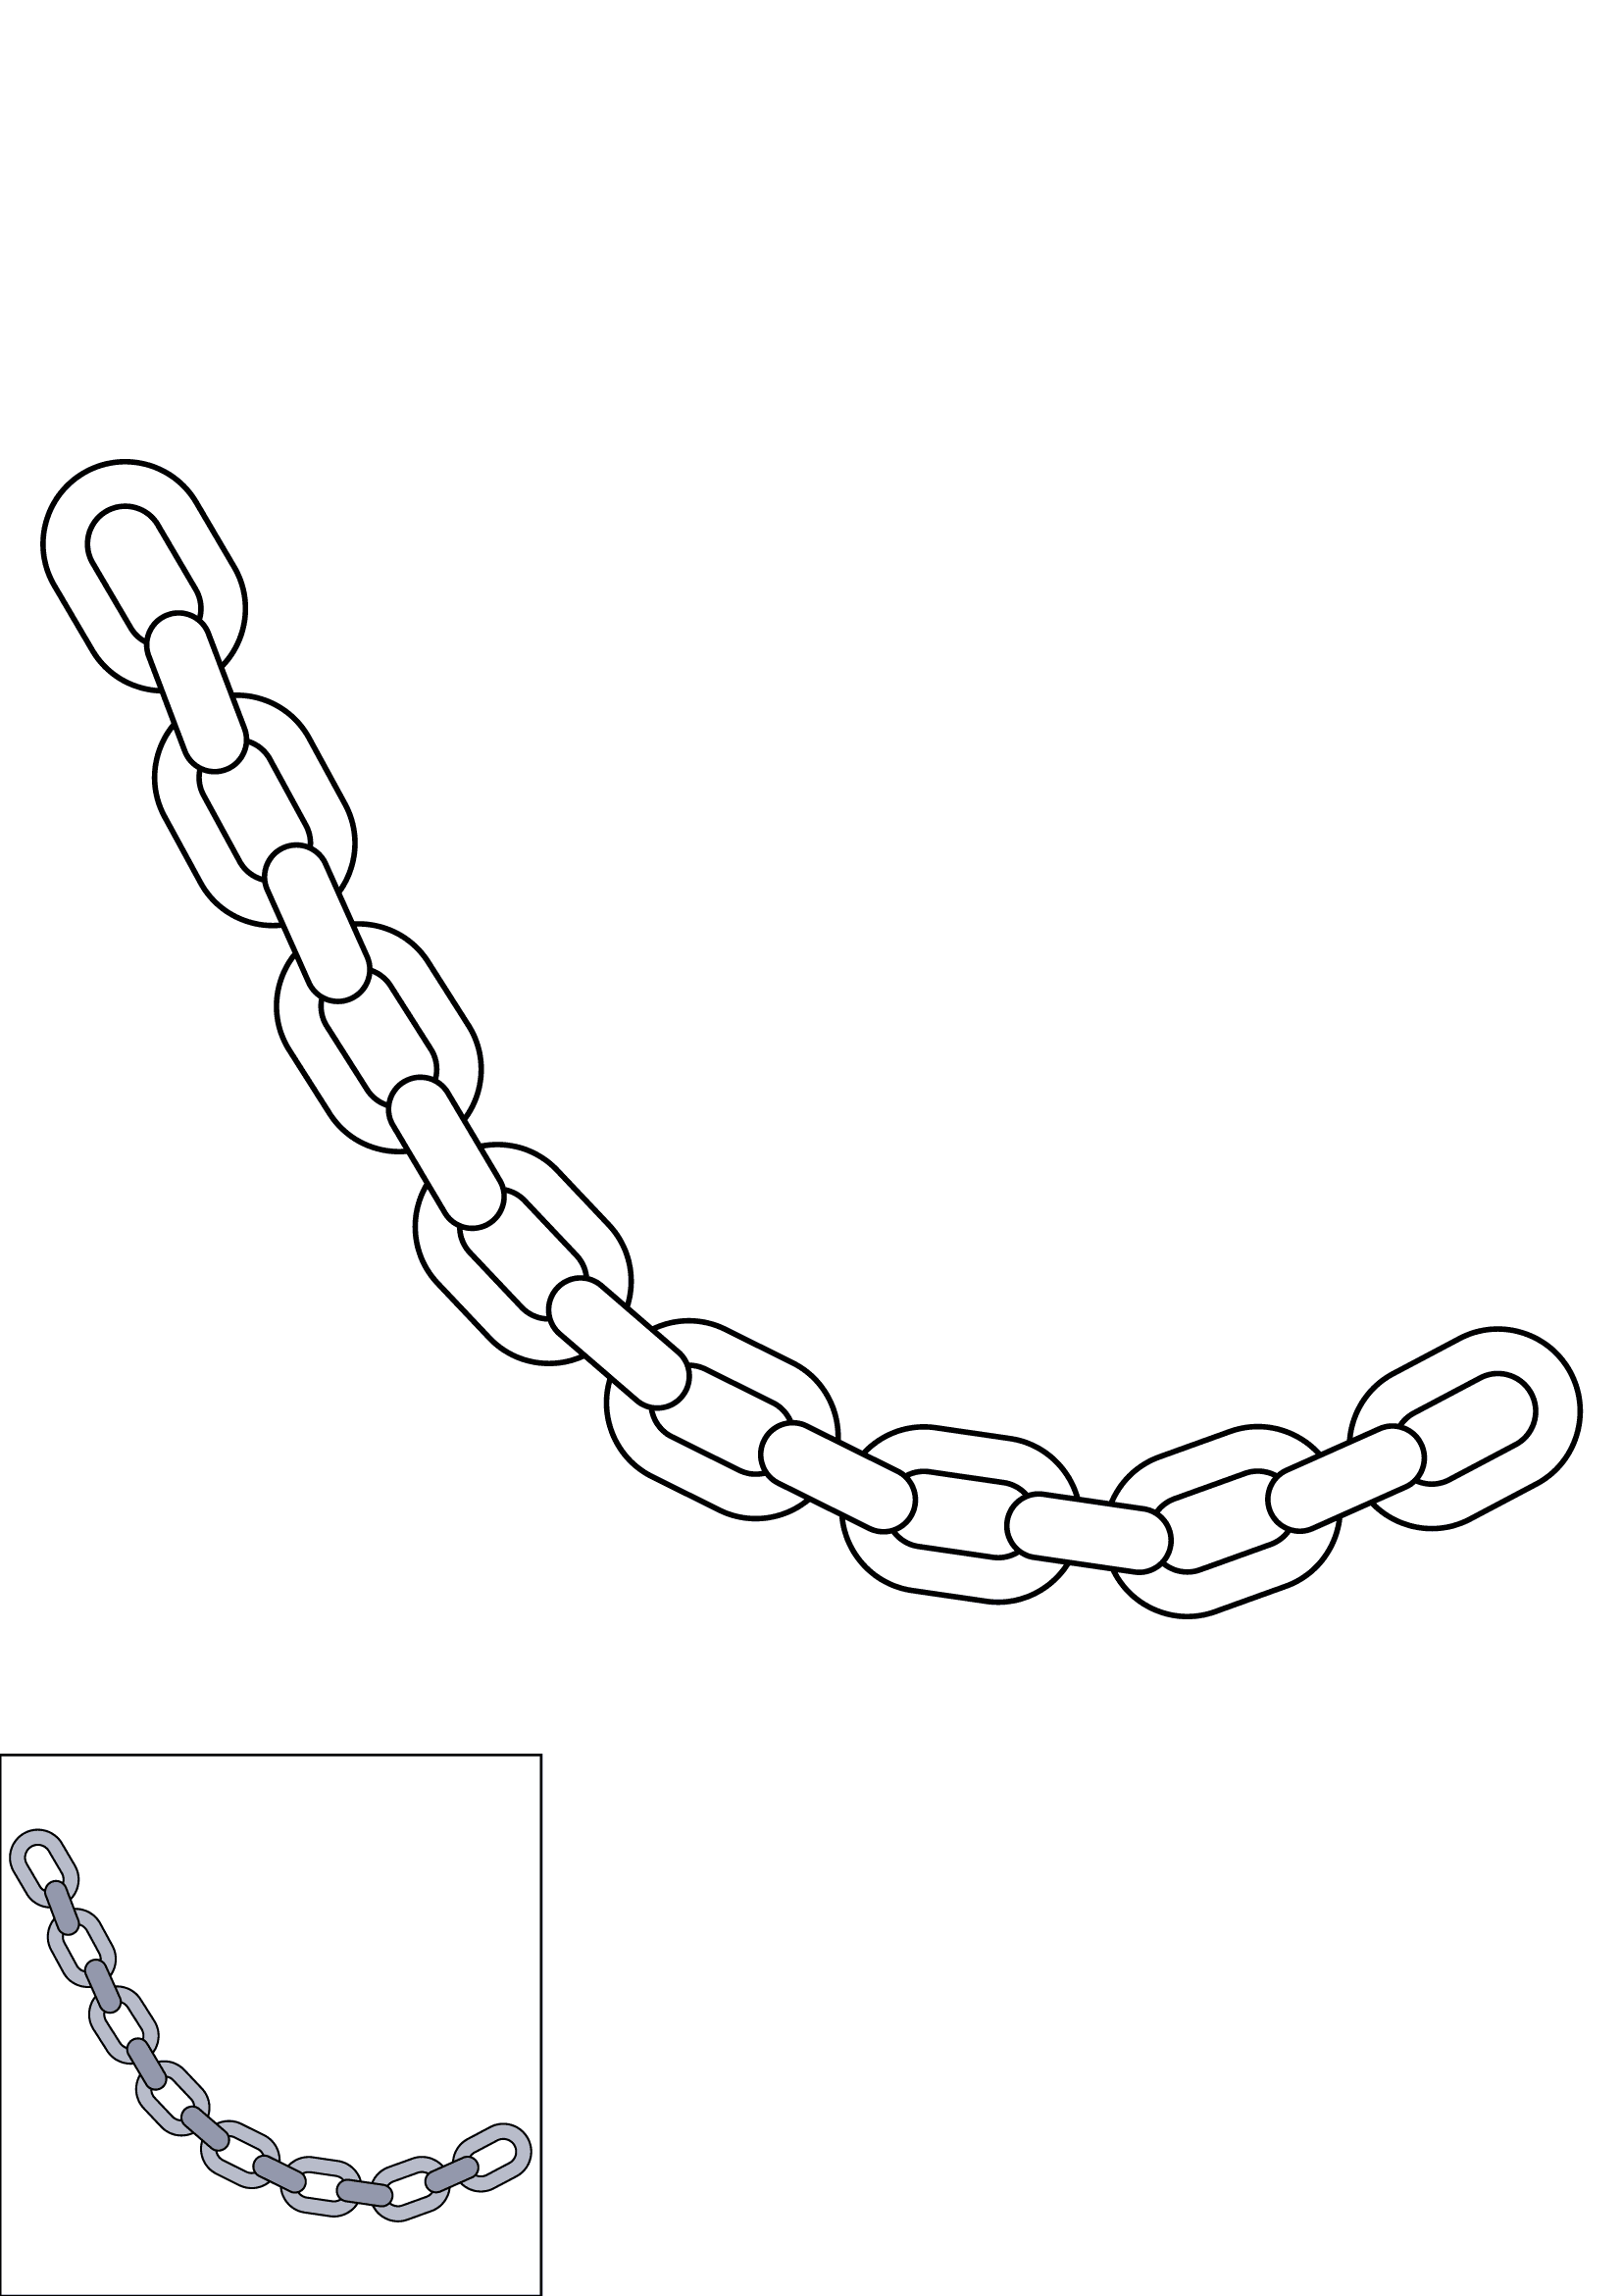 How to Draw A Chain Step by Step Printable Color